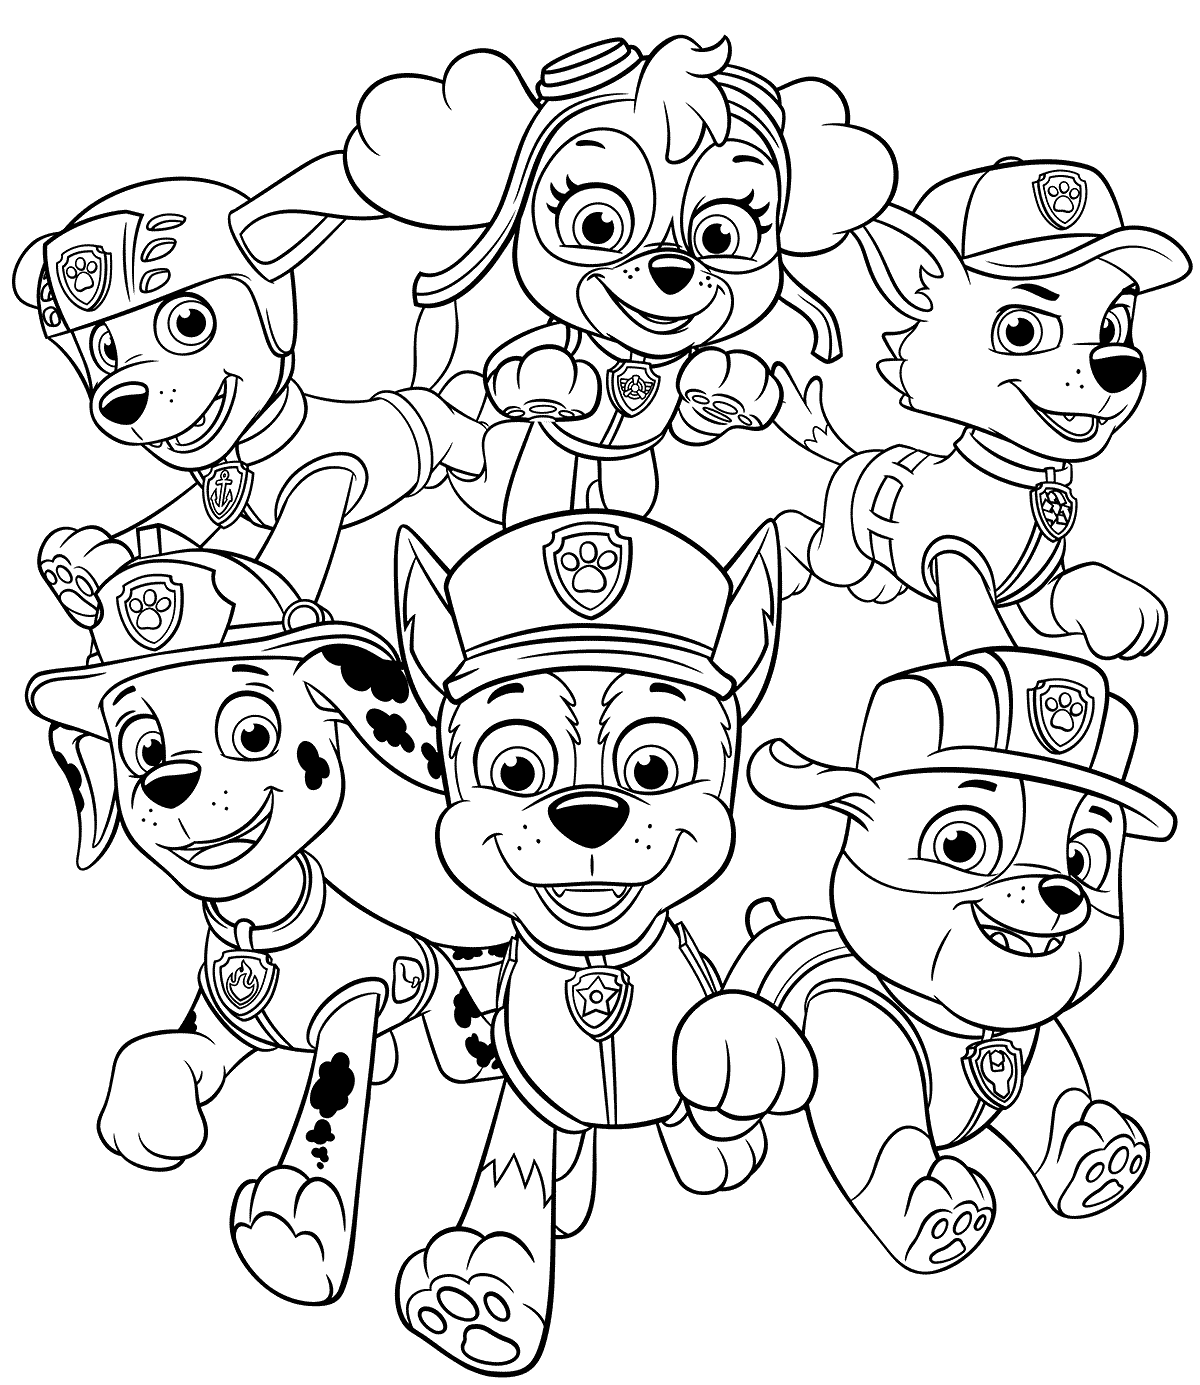 All Paw Patrol Pups Coloring Page